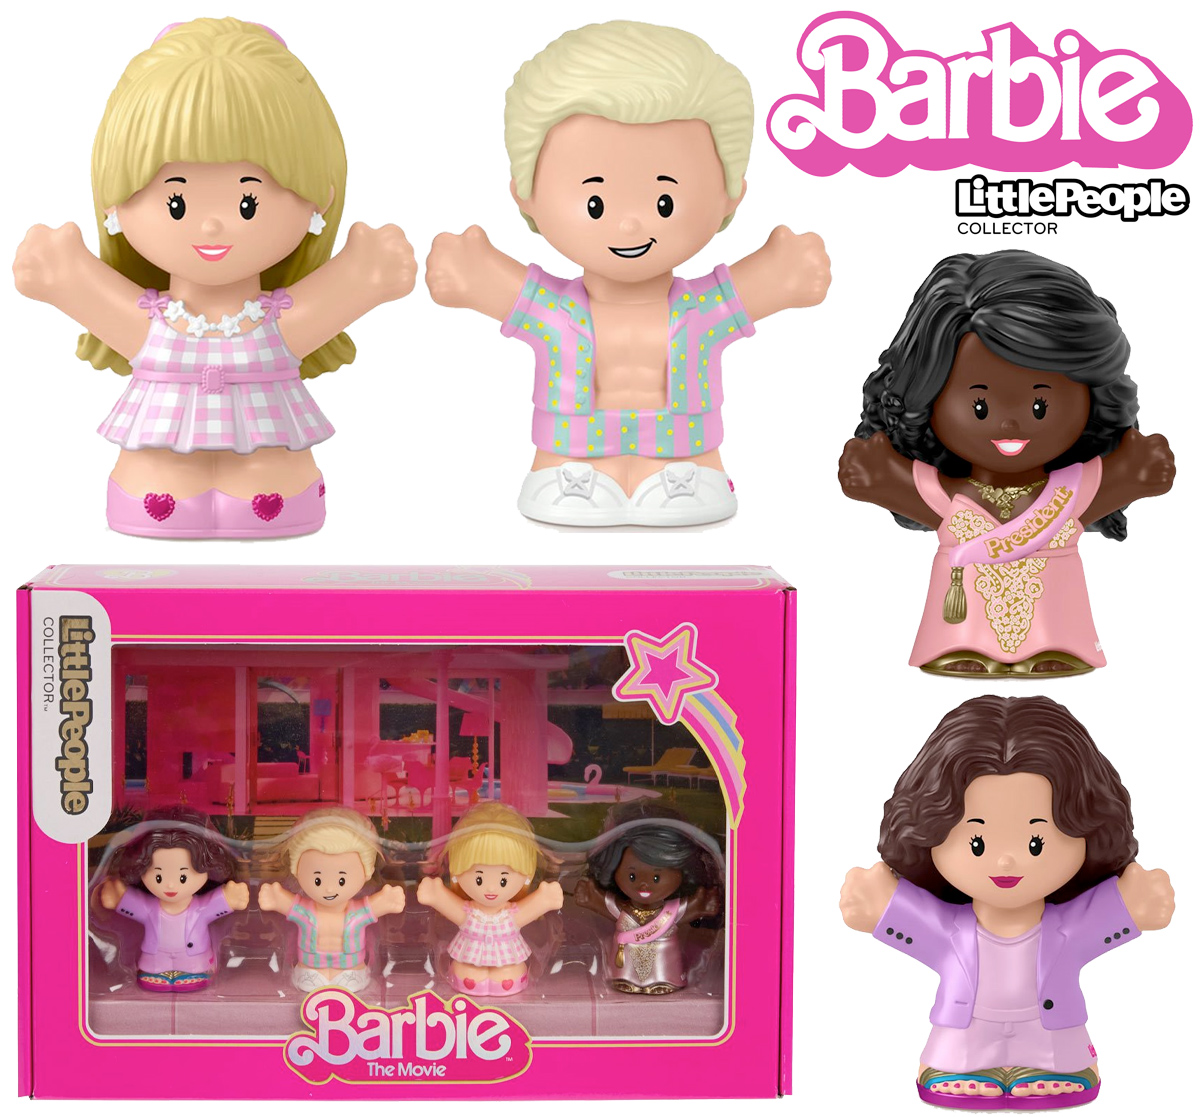 Bonecas Barbie: The Movie Little People Collector (Fisher-Price)